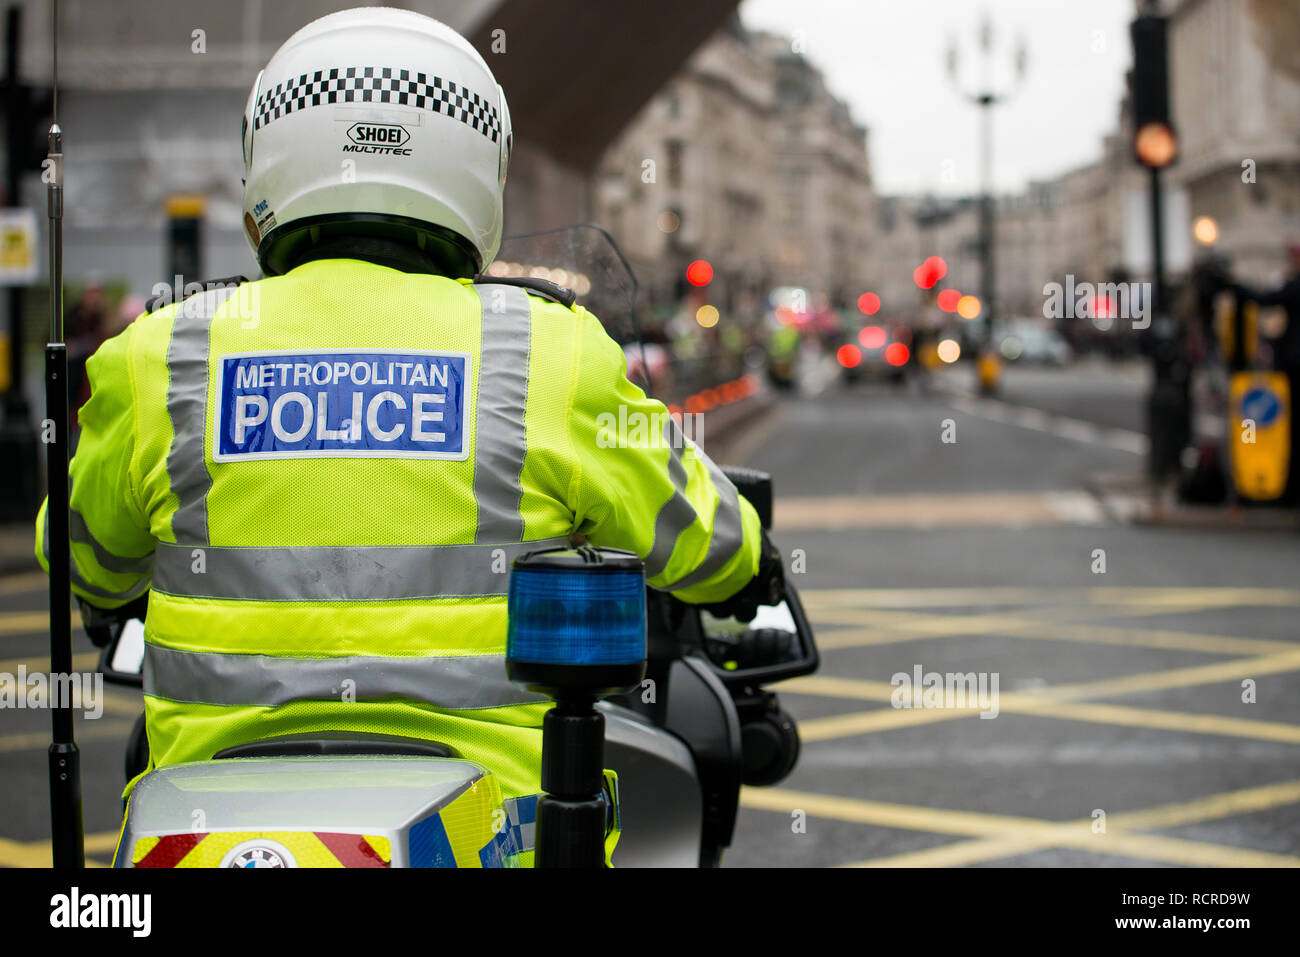 Police motorcycle riders, escort and clear the roads ahead of any traffic for a planned street demonstration through the streets of central London,UK. Stock Photo